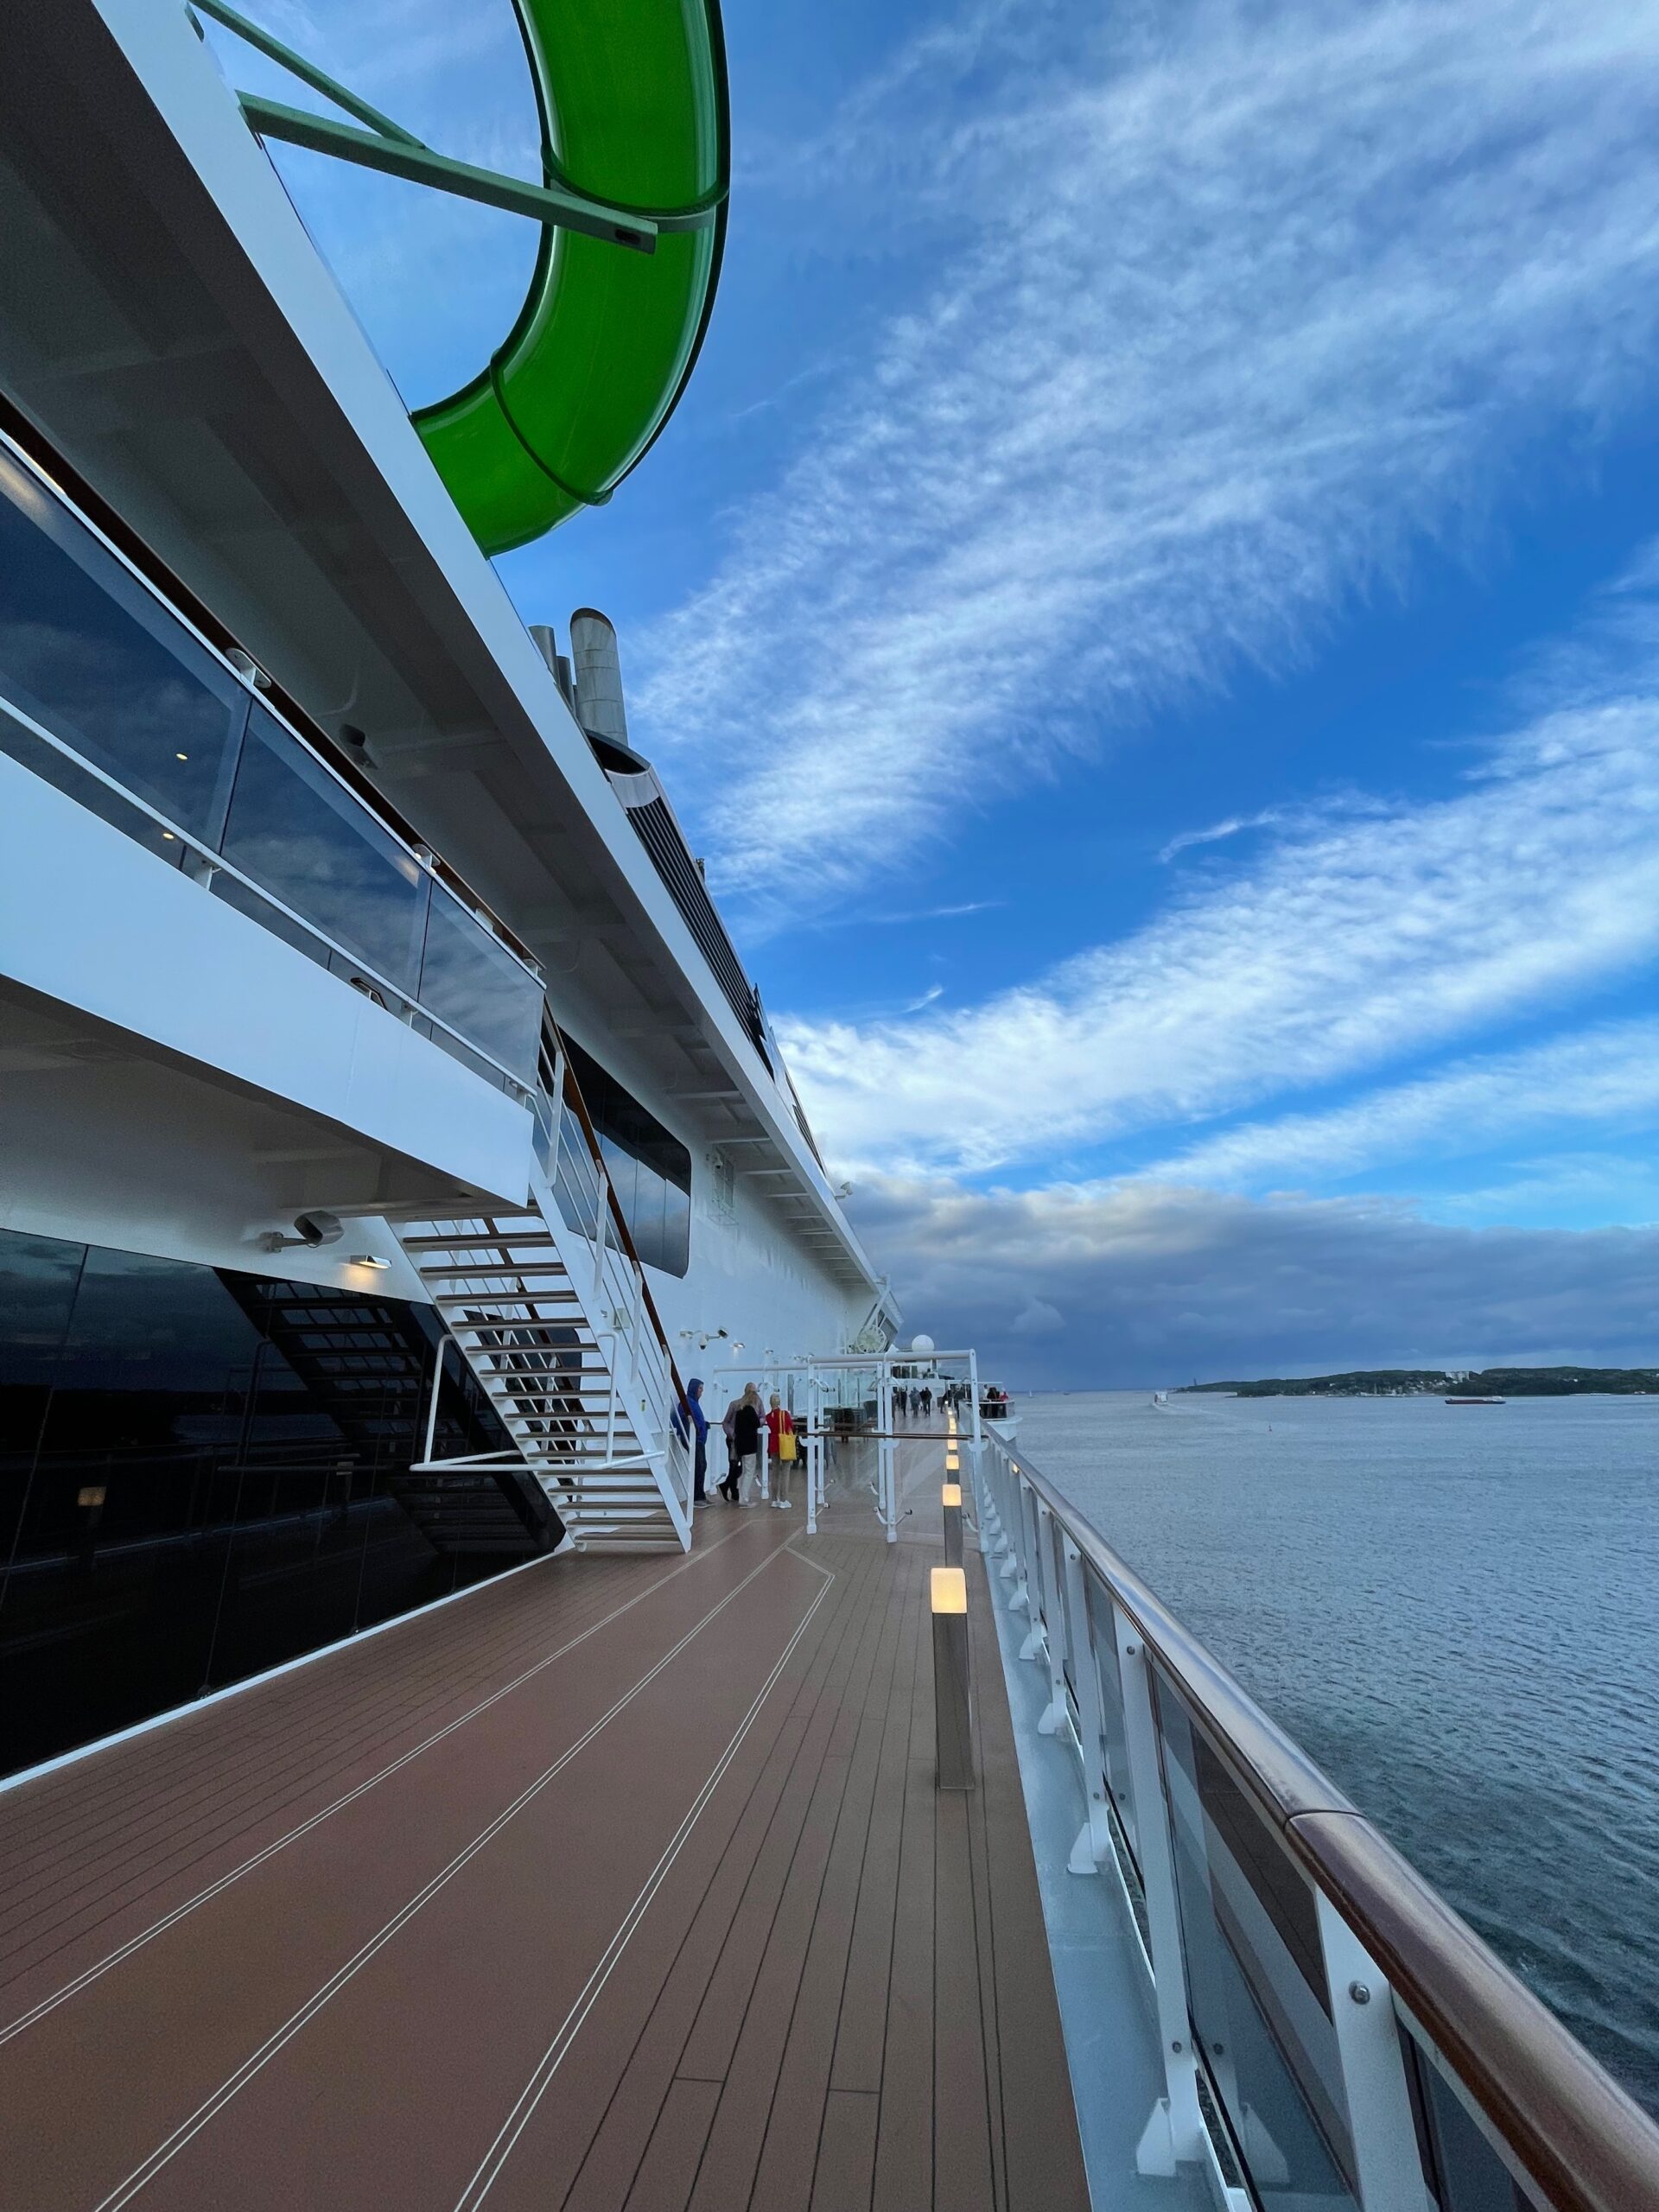 Official excursion or a trip on your own – smart tips to make the best out of your cruise.